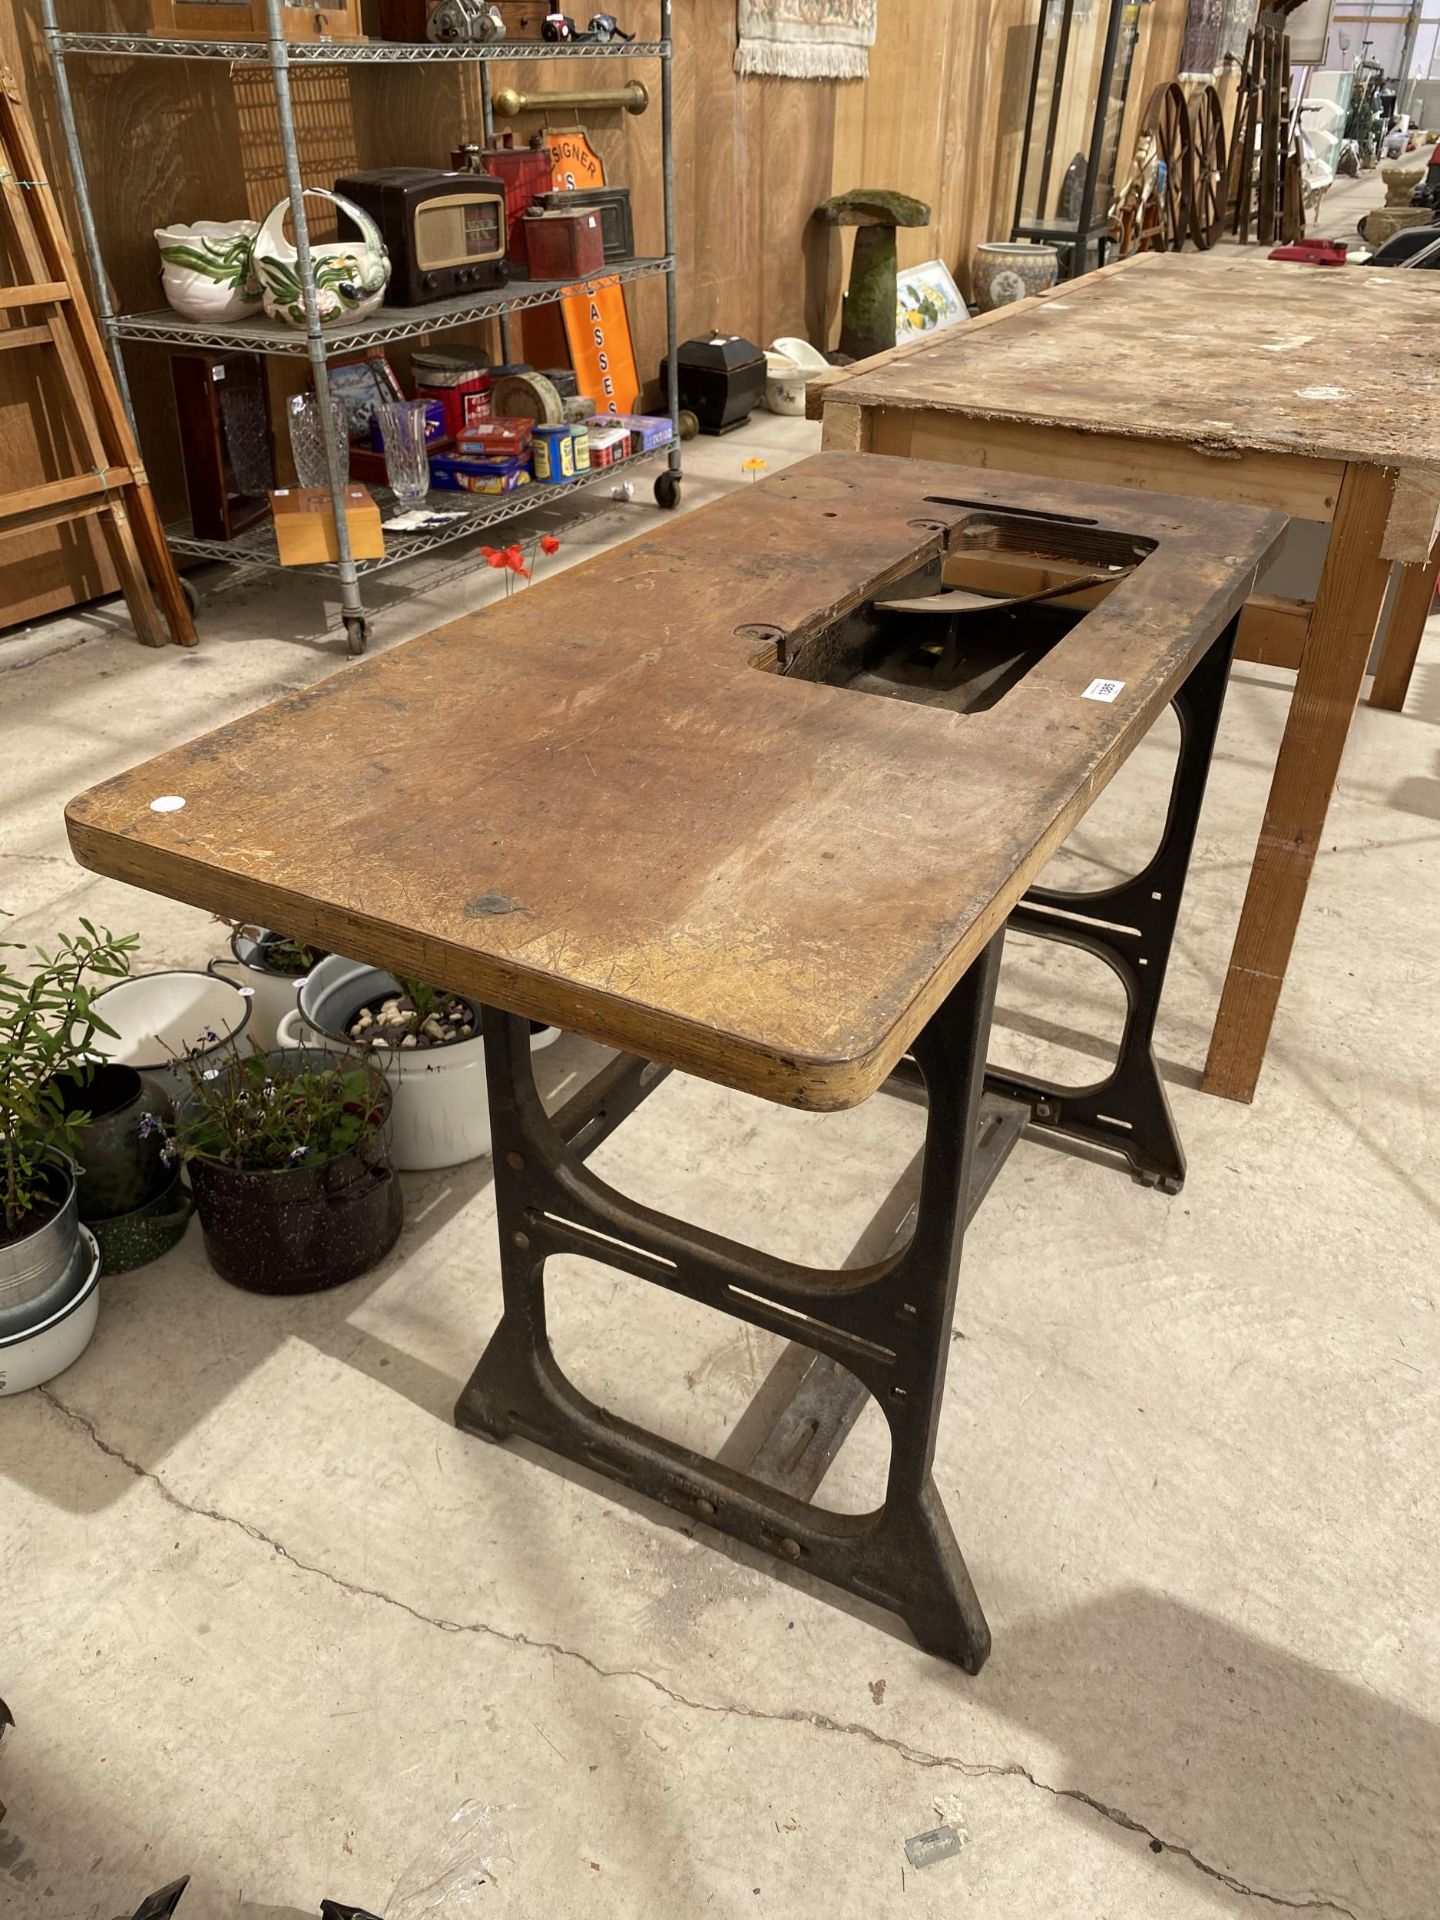 AN INDUSTRIAL SEWING MACHINE TABLE WITH HEAVY CAST IRON BASE - Image 4 of 4